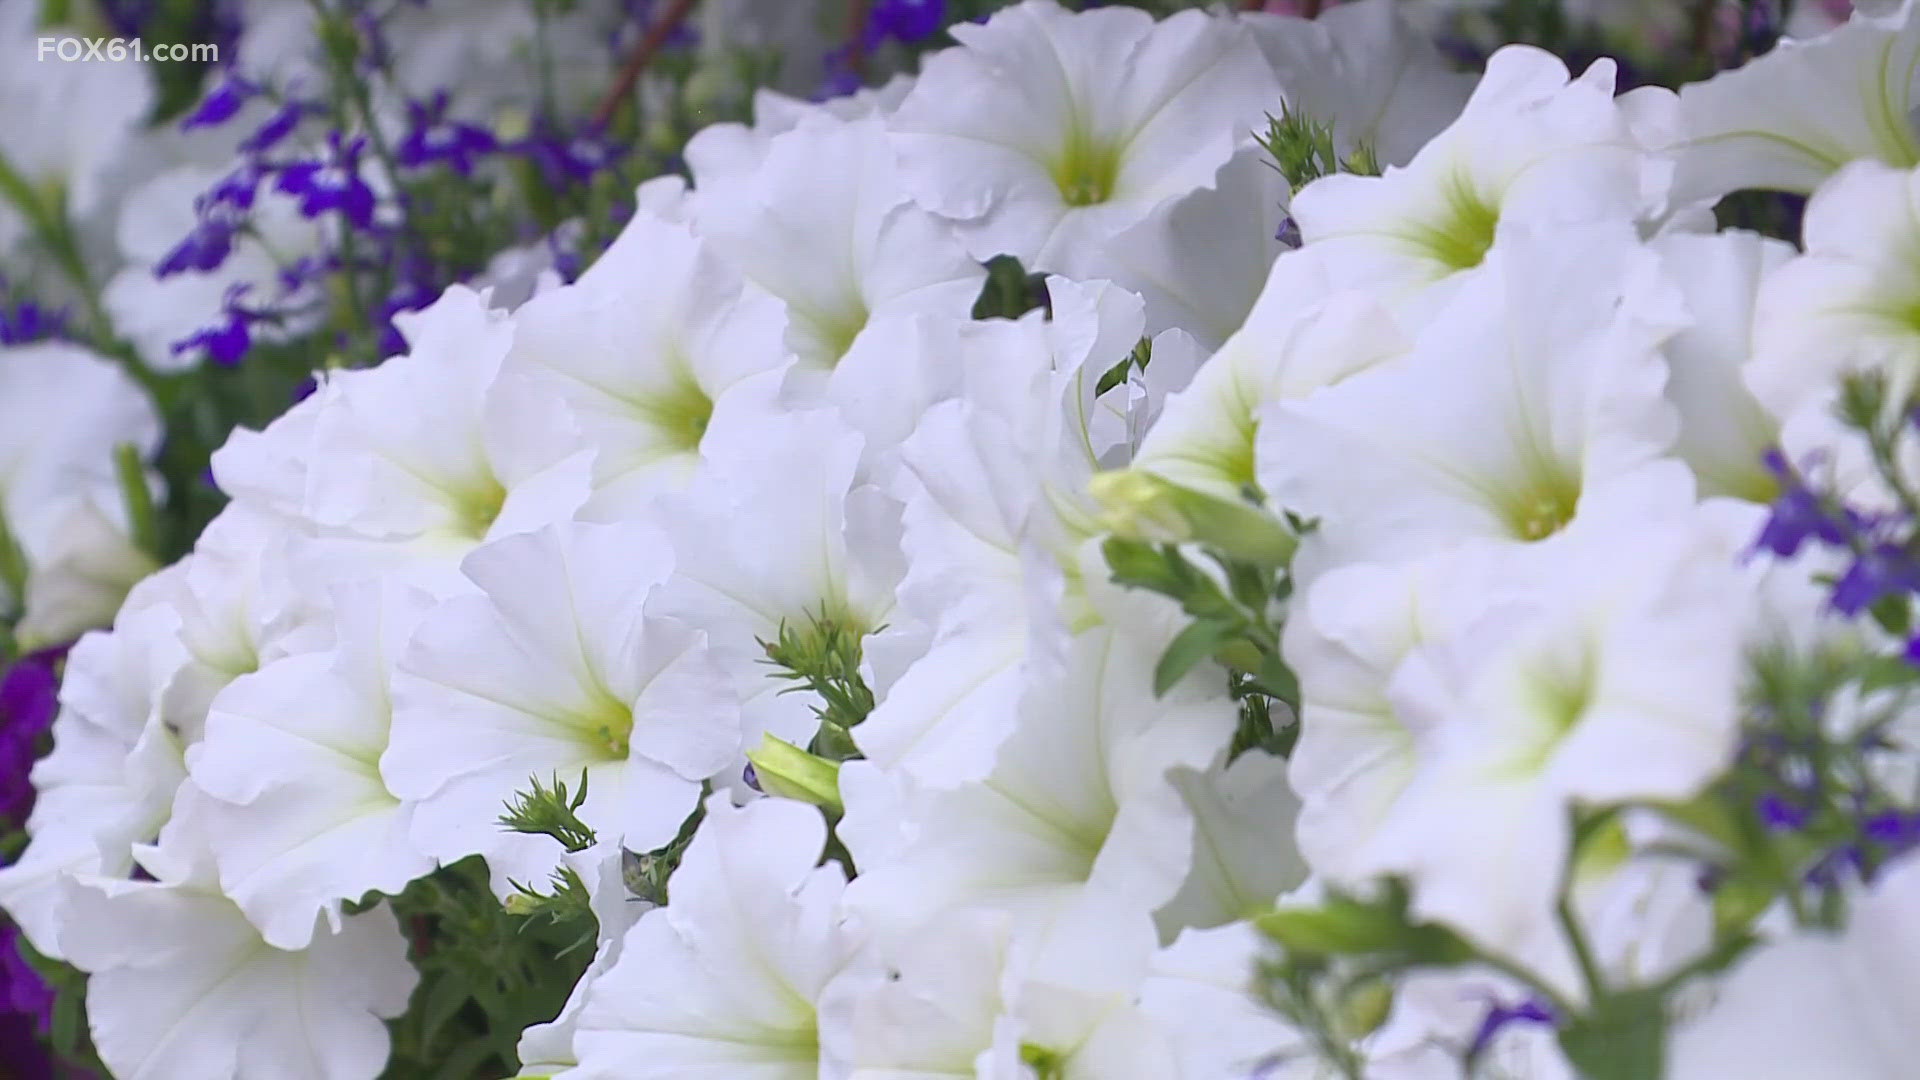 Mother's Day is quickly approaching, and for one greenhouse in Somers, business is blooming. It's important to know the flowers are grown right here in Connecticut.